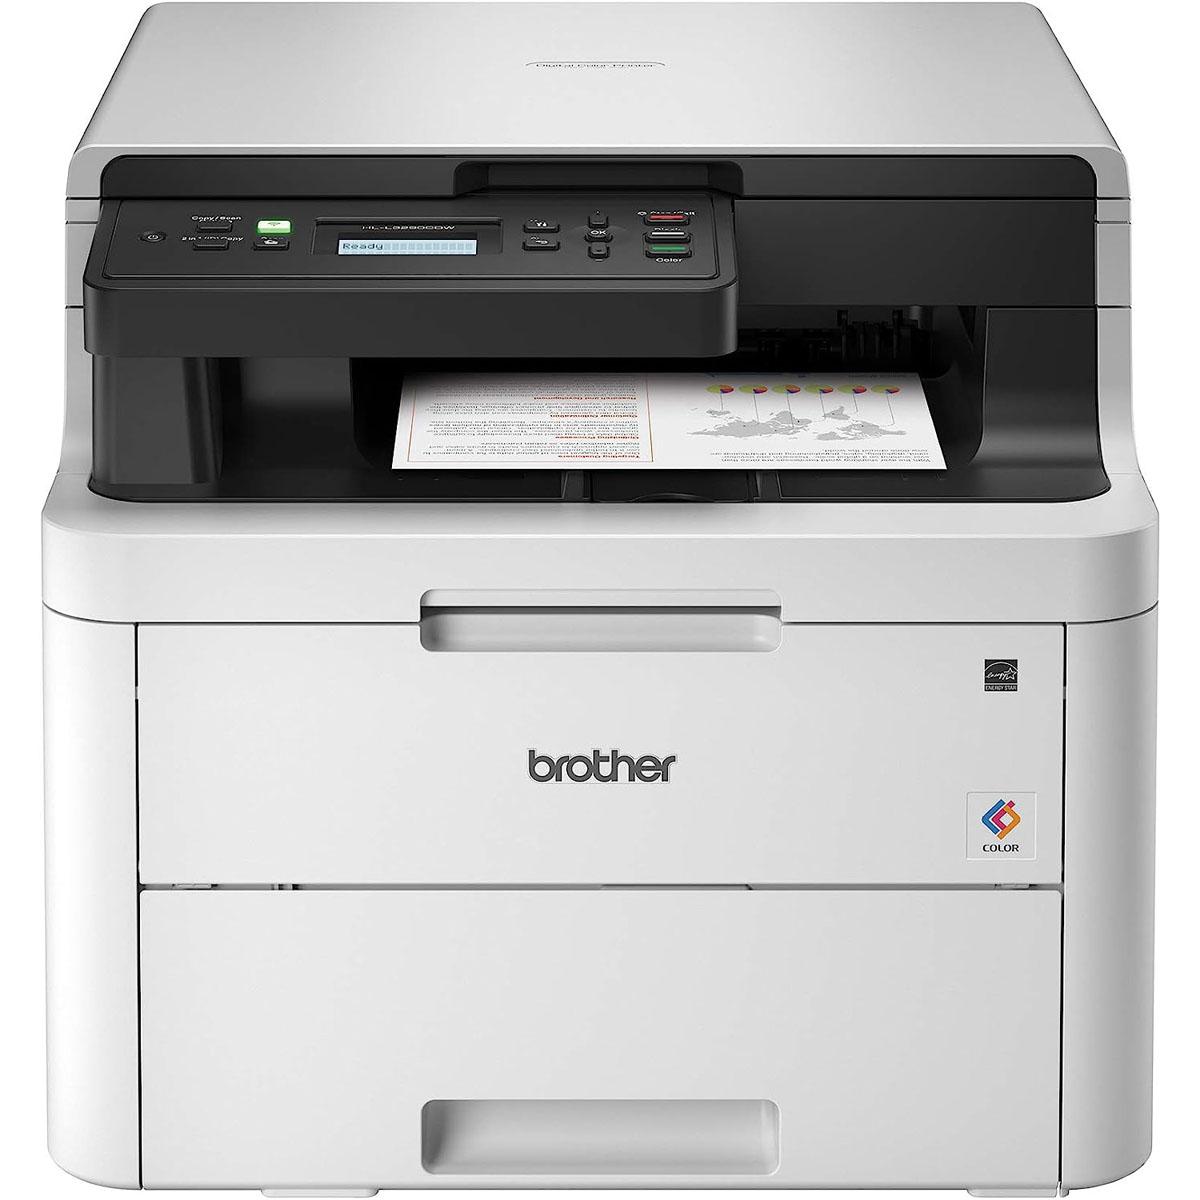 Brother HL-L3290CDW Wireless Laser Color Printer with $25 GC for $299.99 Shipped